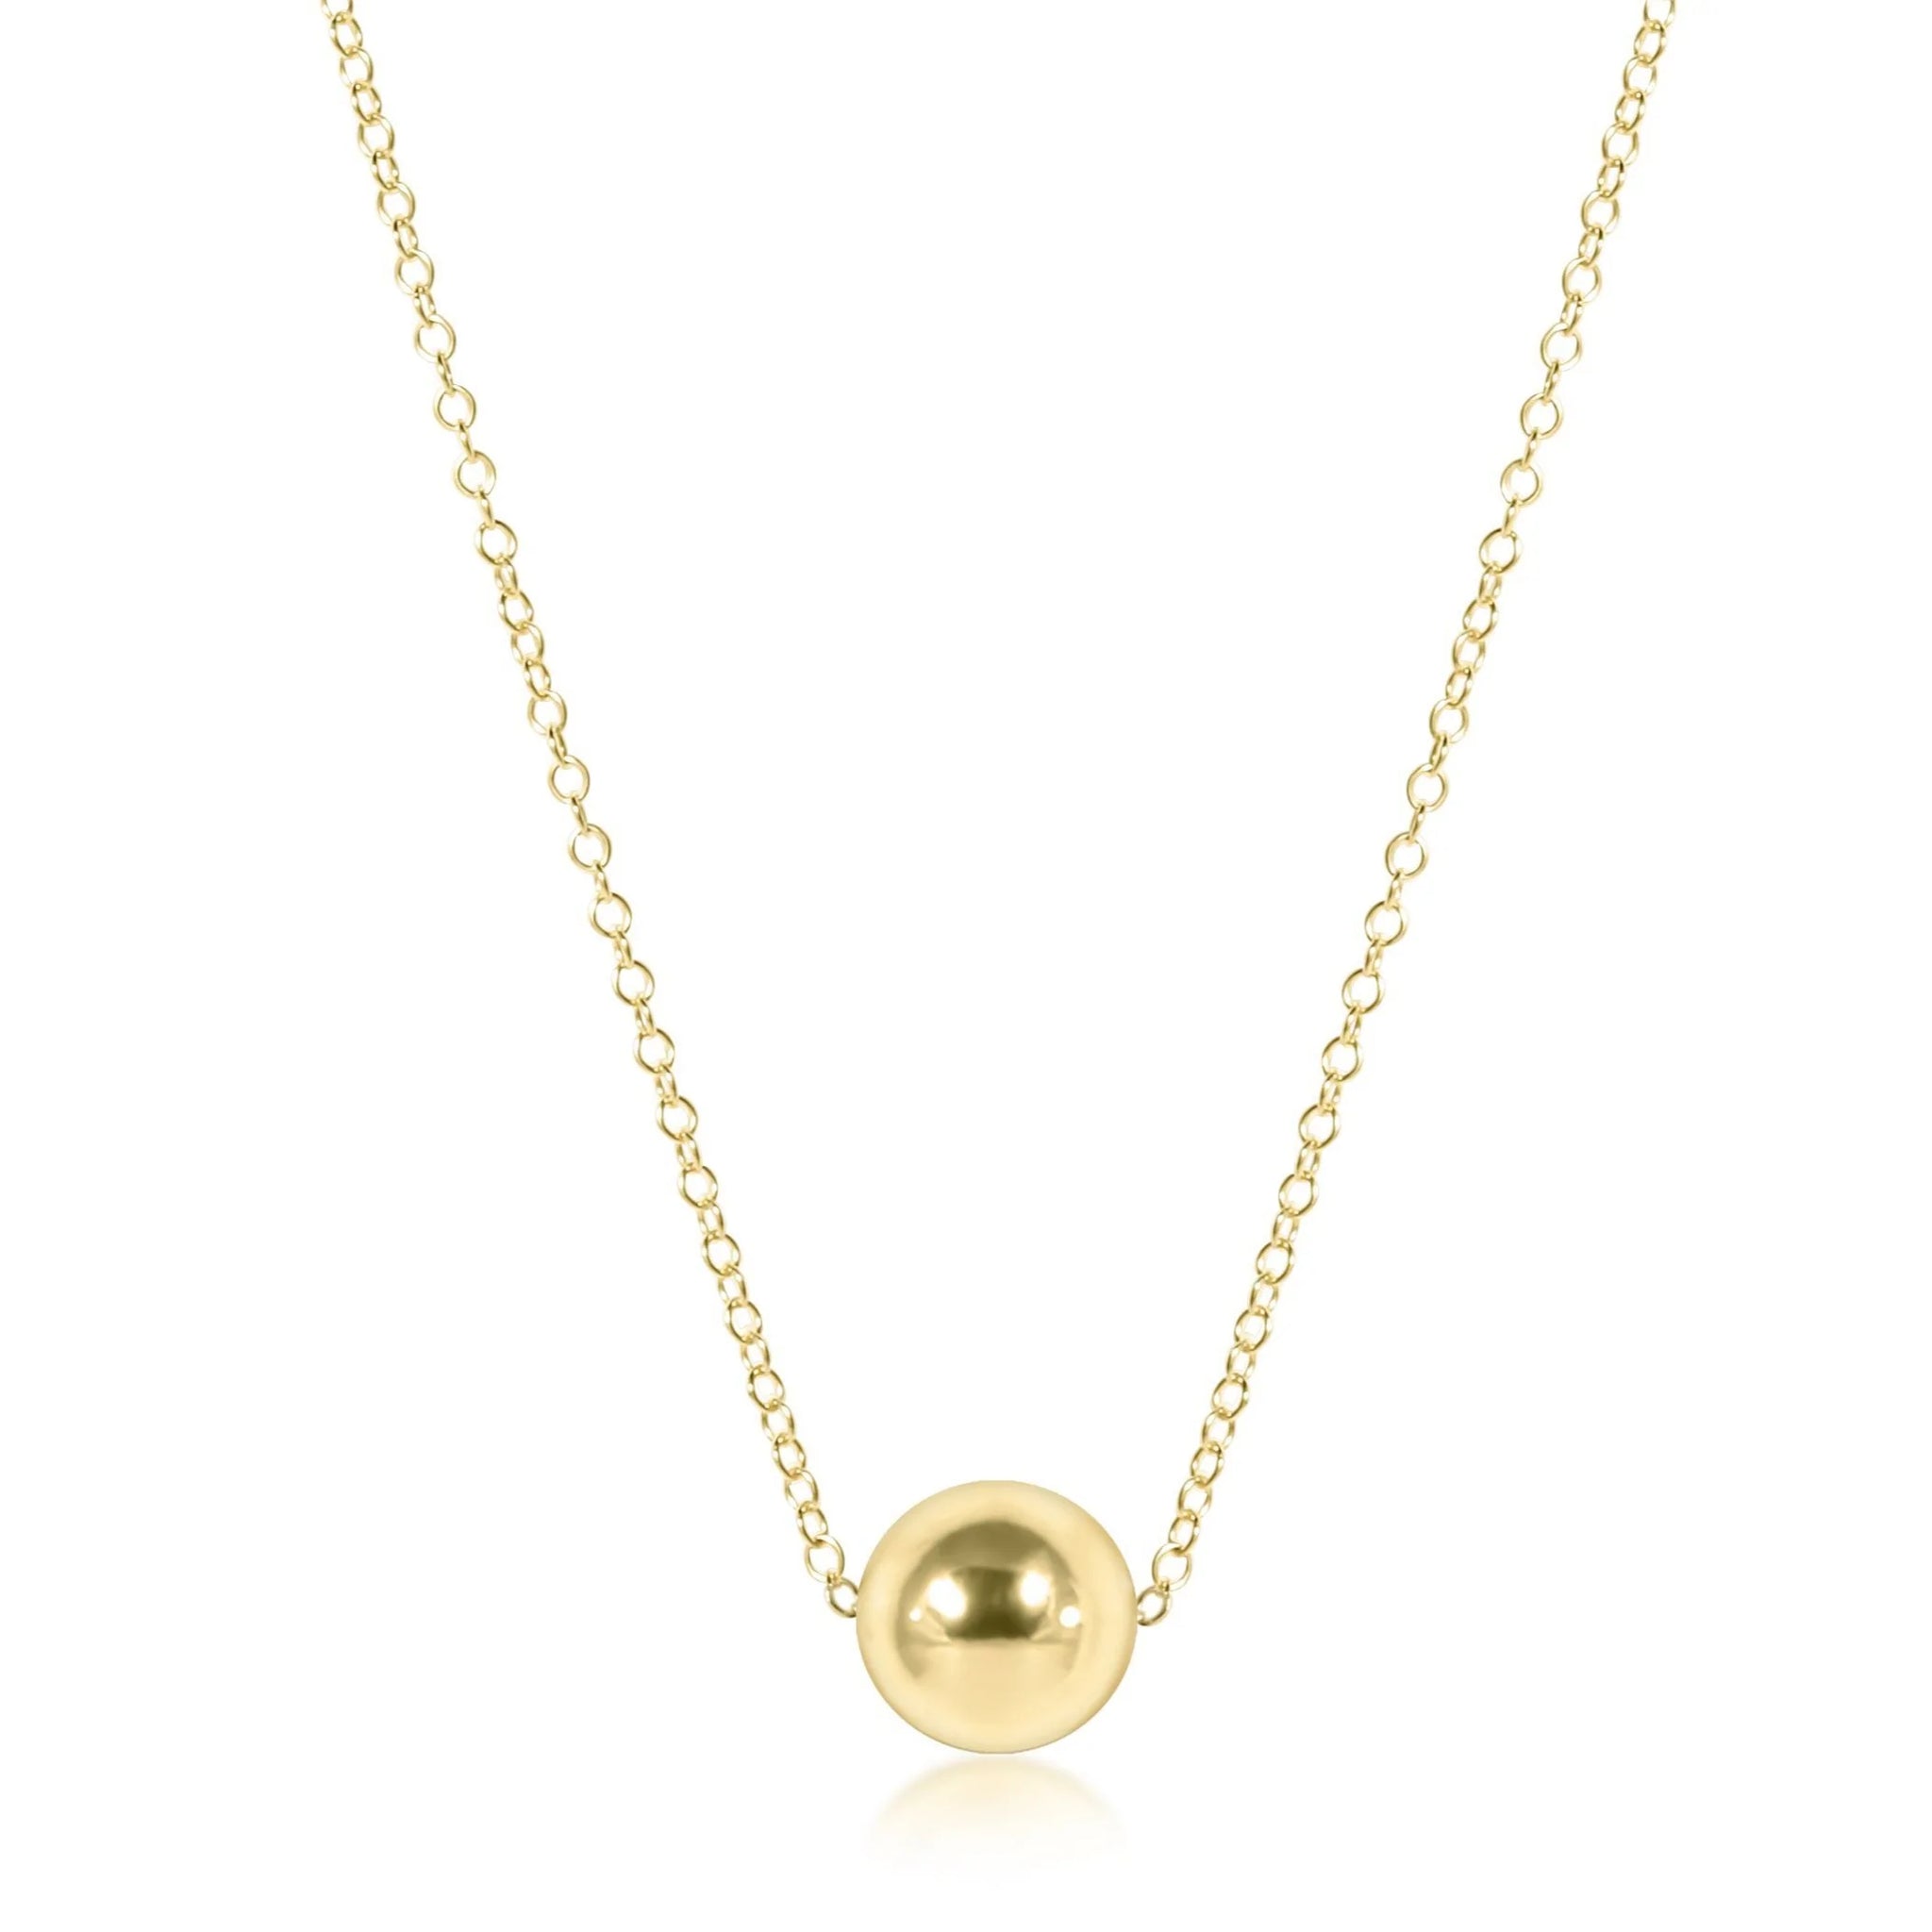 16" Classic 8mm Gold Necklace